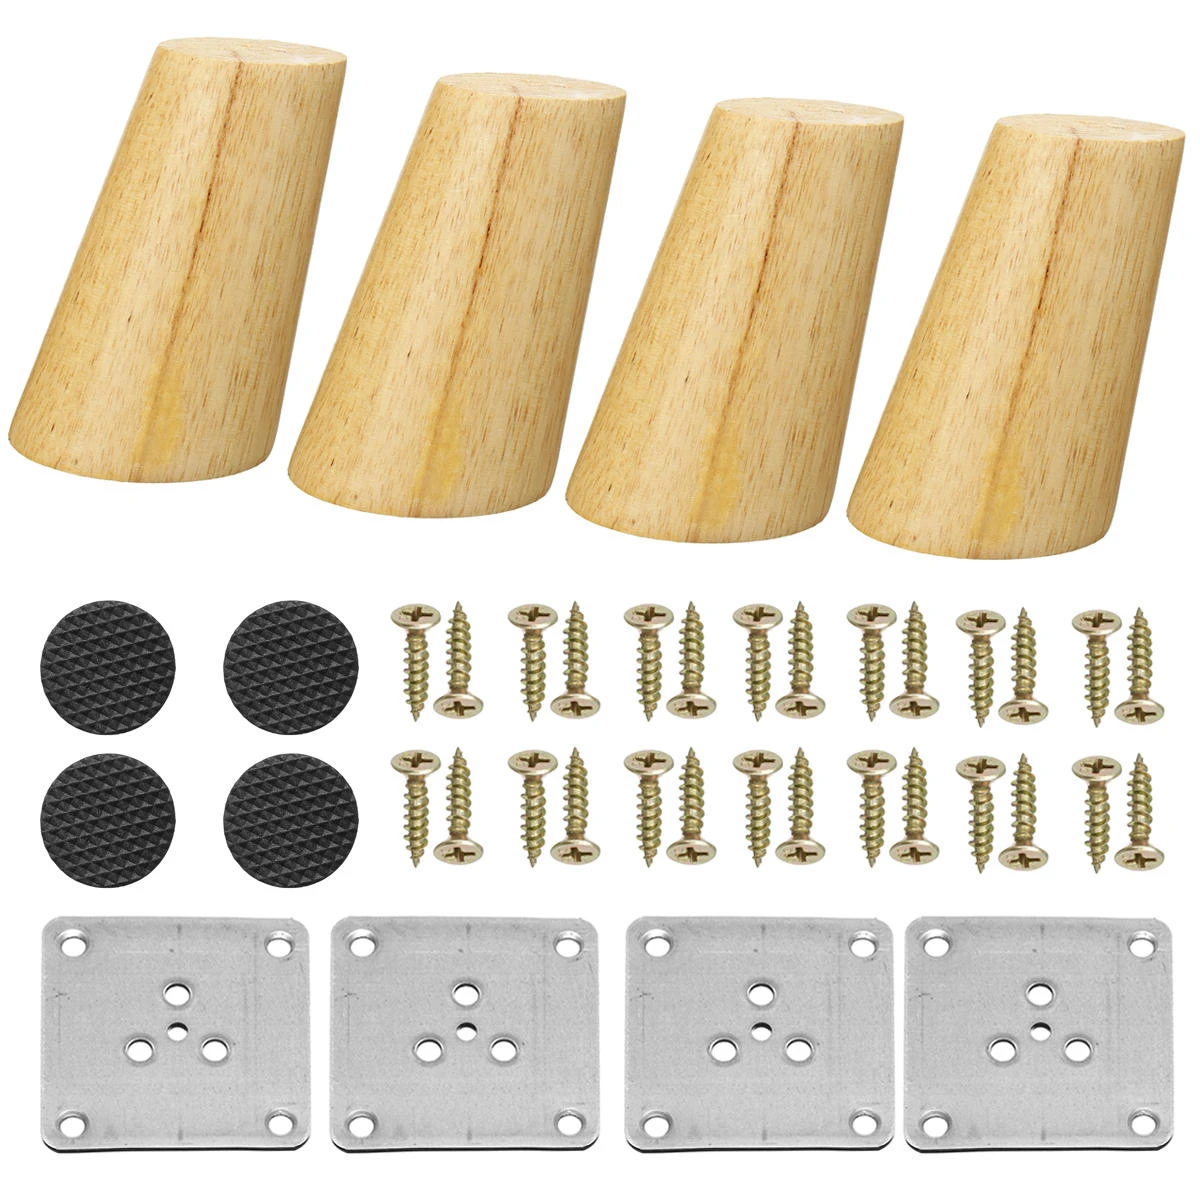 4pcs Set Solid Wooden Cone Angled Furniture Legs Kit Sofa Table